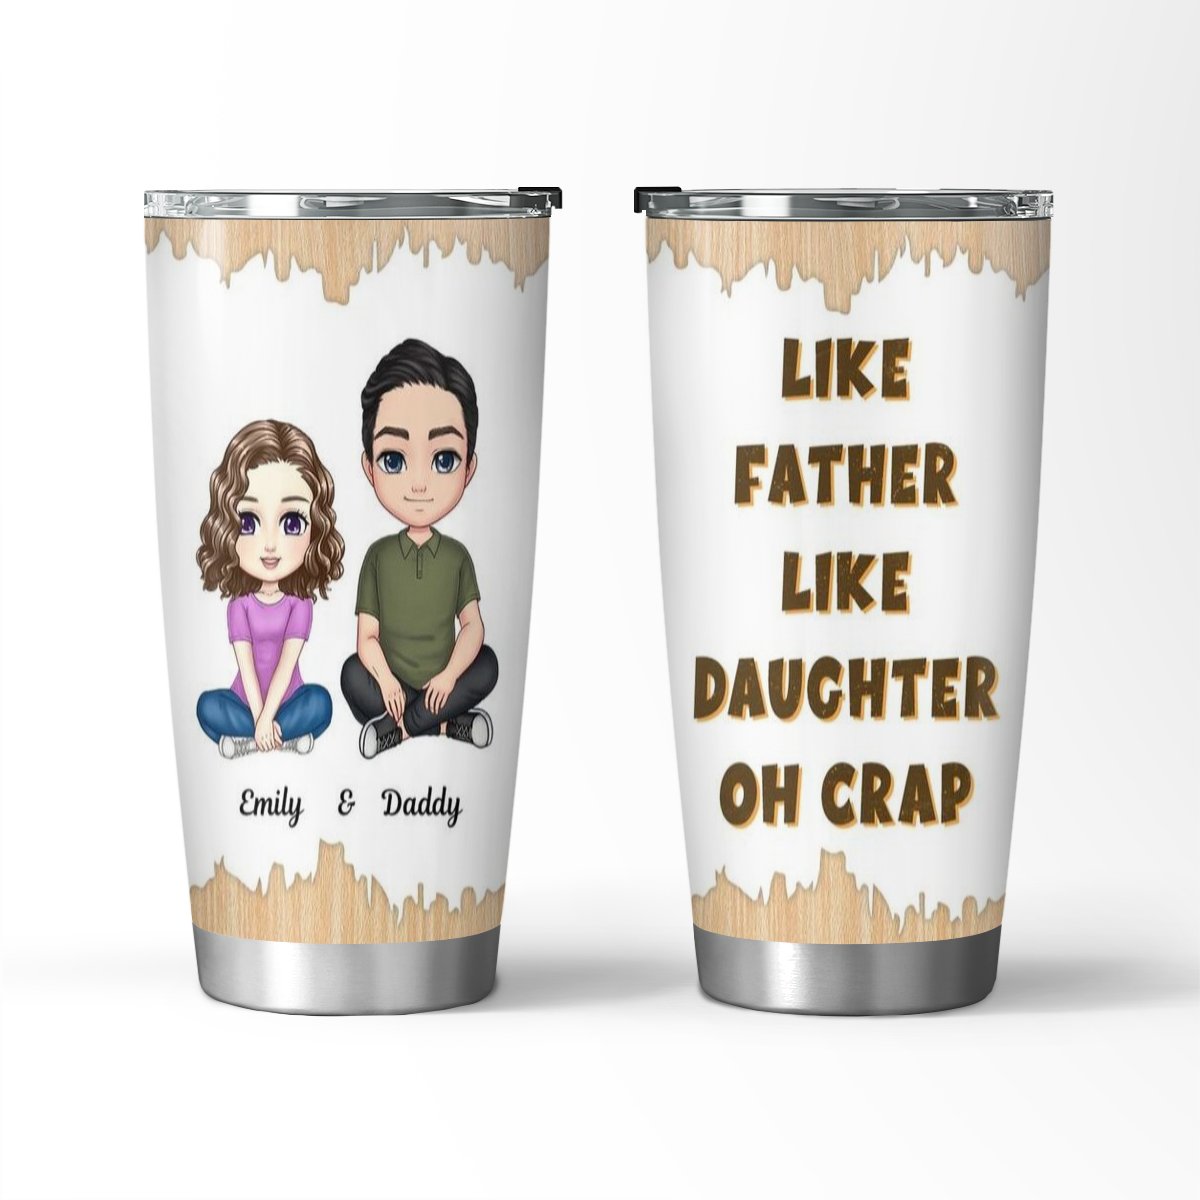 🎉 Looking for the perfect gift for Dad? 🎁 Look no further! Our Personalized 20oz Tumbler is here to make him smile! 🤩 With customizable cartoon-style figures and hilarious quotes, it's a gift he'll treasure forever. Make Dad's day extra special! 💙 #PersonalizedGift #DadGift